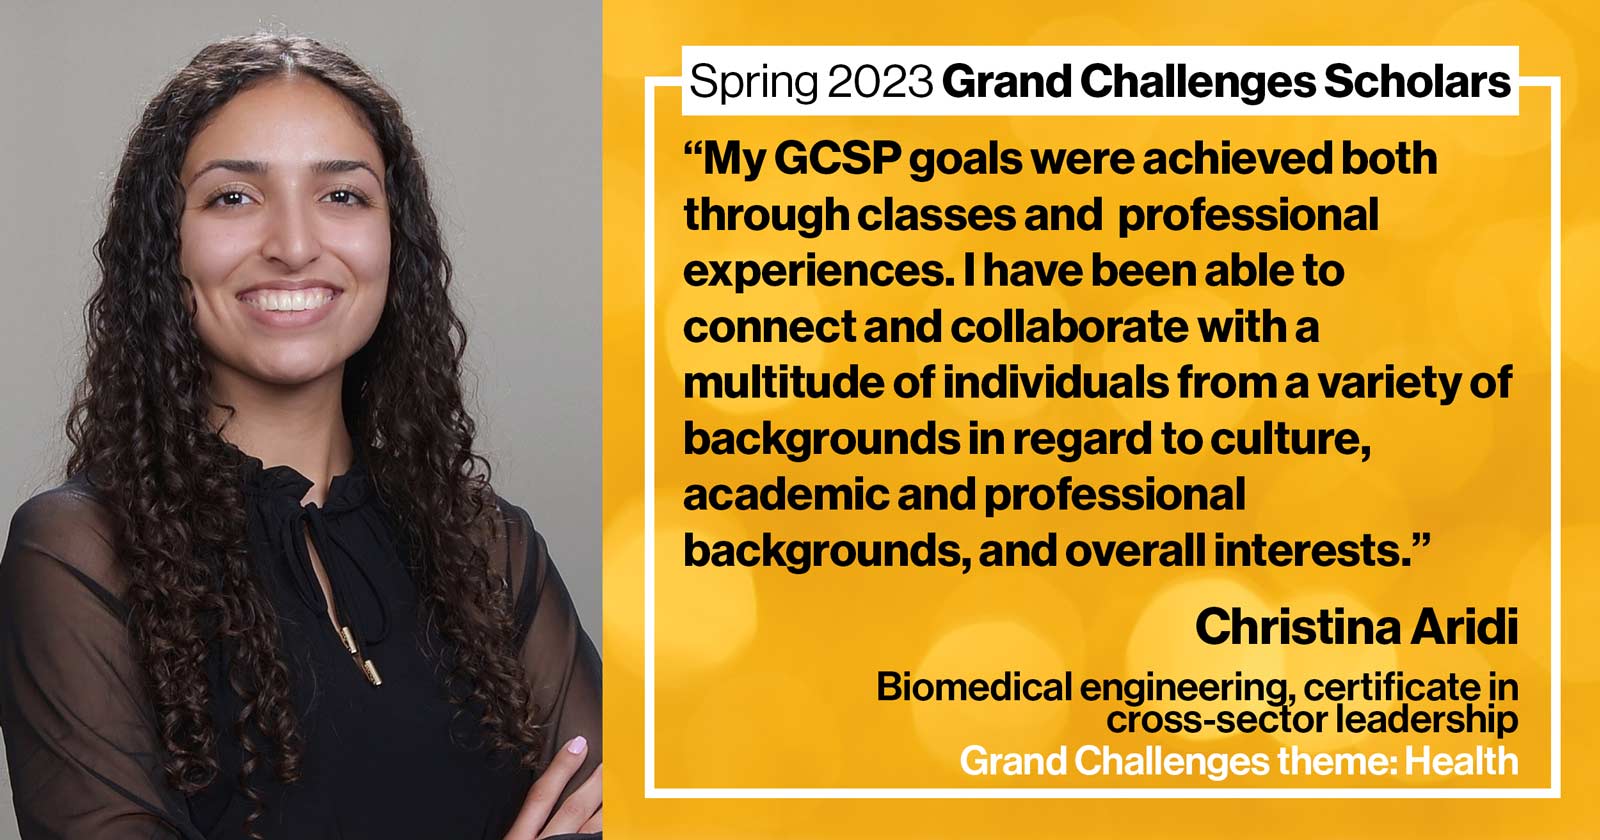 "Christina Aridi Biomedical engineering Grand Challenge: Health Quote: “My GCSP goals were achieved both through classes and through academic/professional experiences. I have been able to connect and collaborate with a multitude of individuals from a variety of backgrounds in regards to culture, academic and professional backgrounds, and overall interests.”"